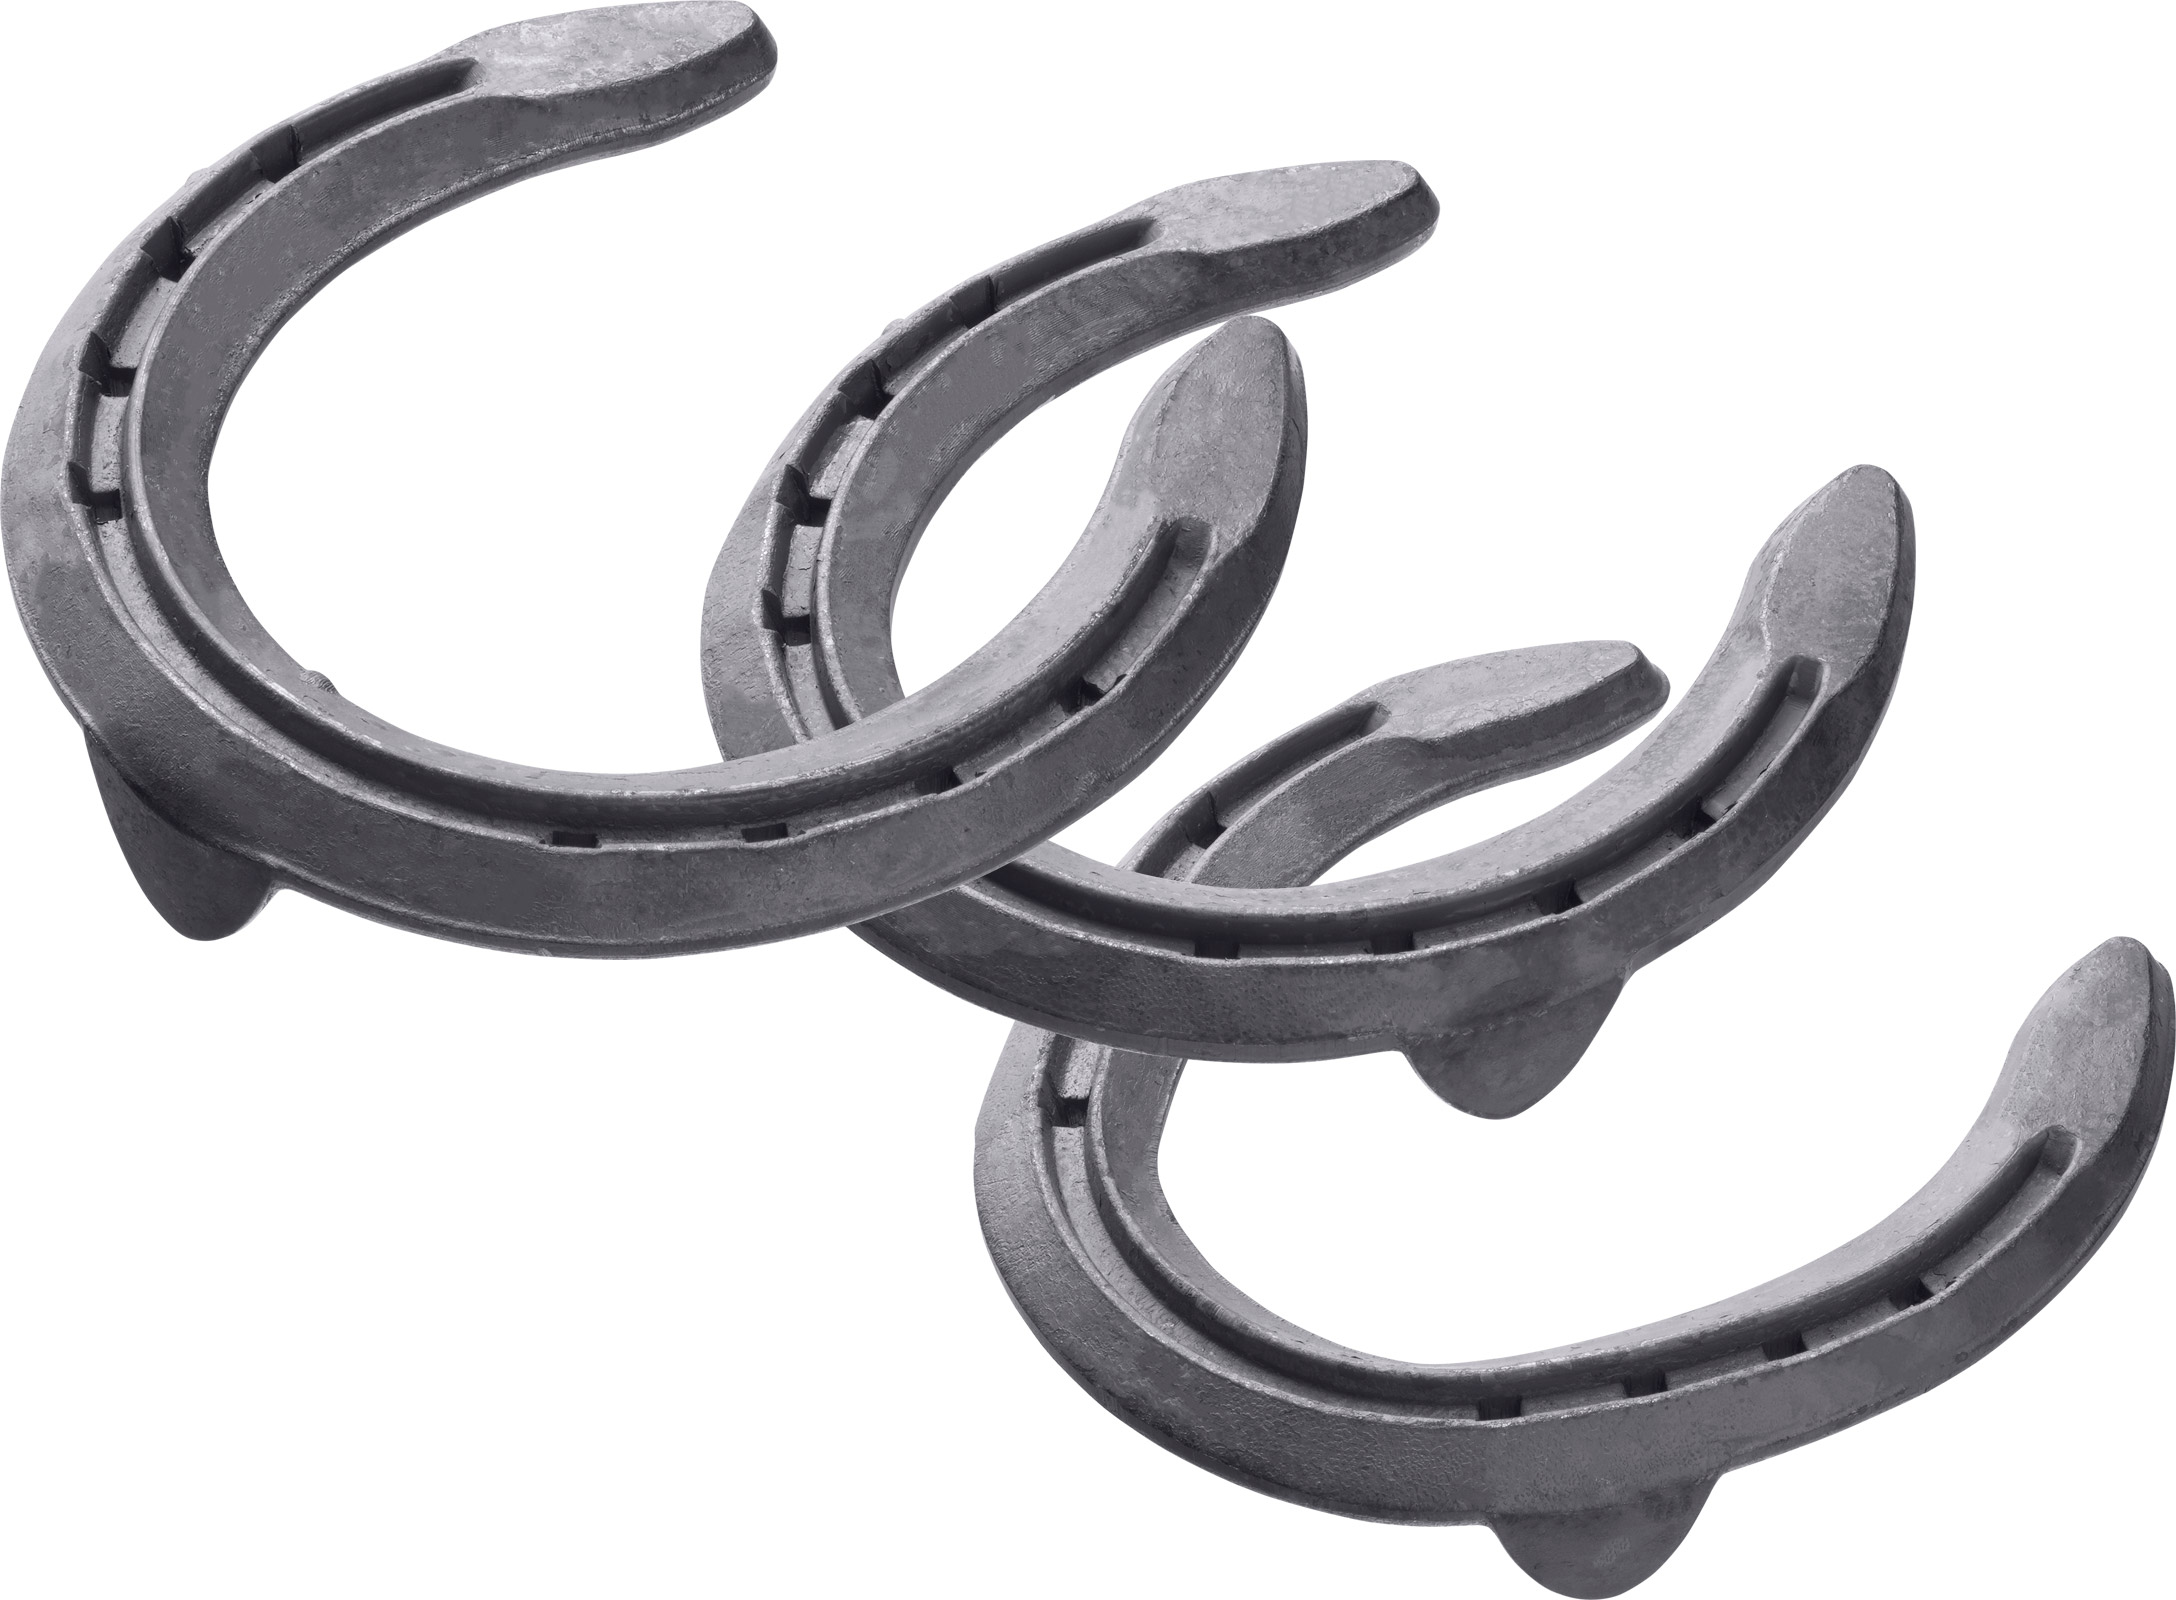 St. Croix Forge Eventer Steel horseshoes, bottom side view